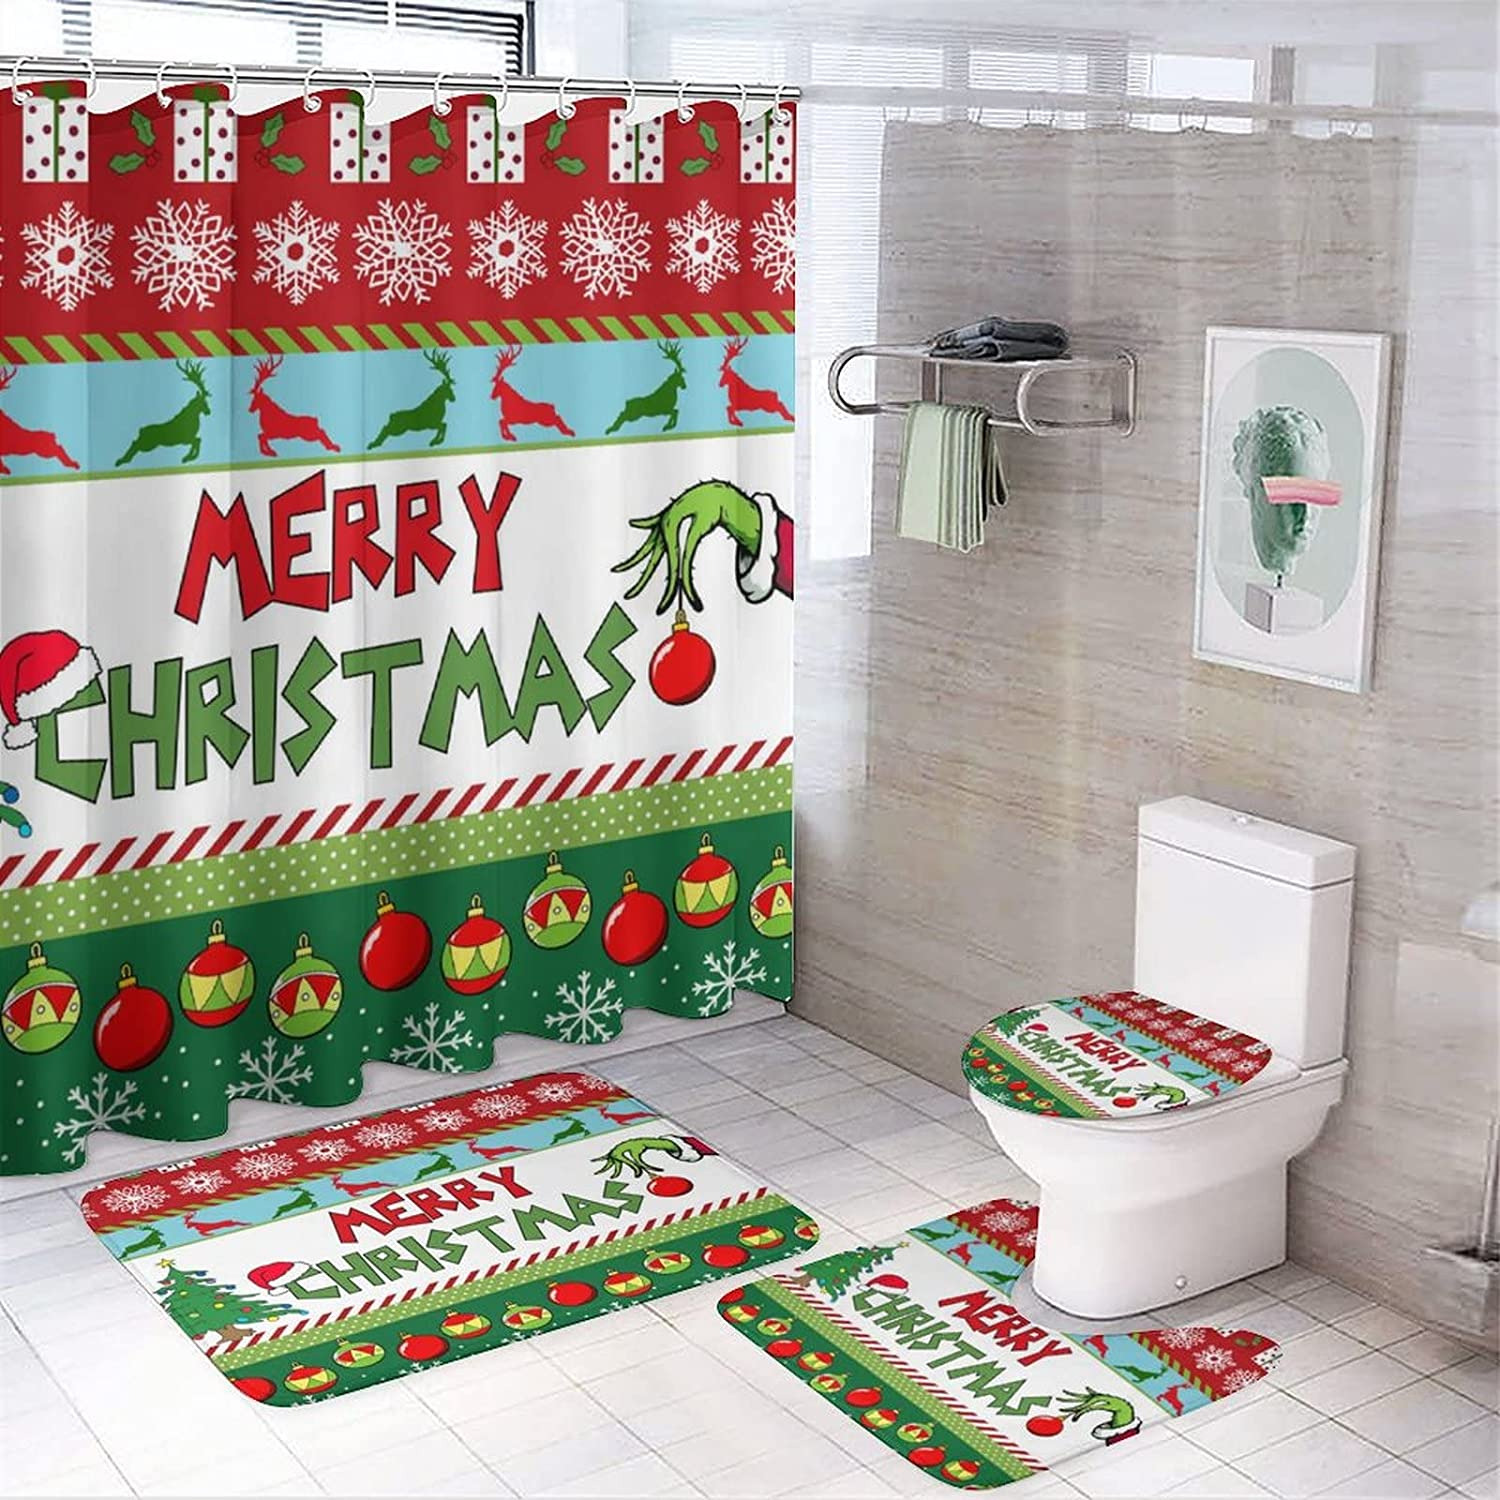 Grinch Merry Christmas Bathroom Sets, Shower Curtain Sets. Gift Idea For Holiday